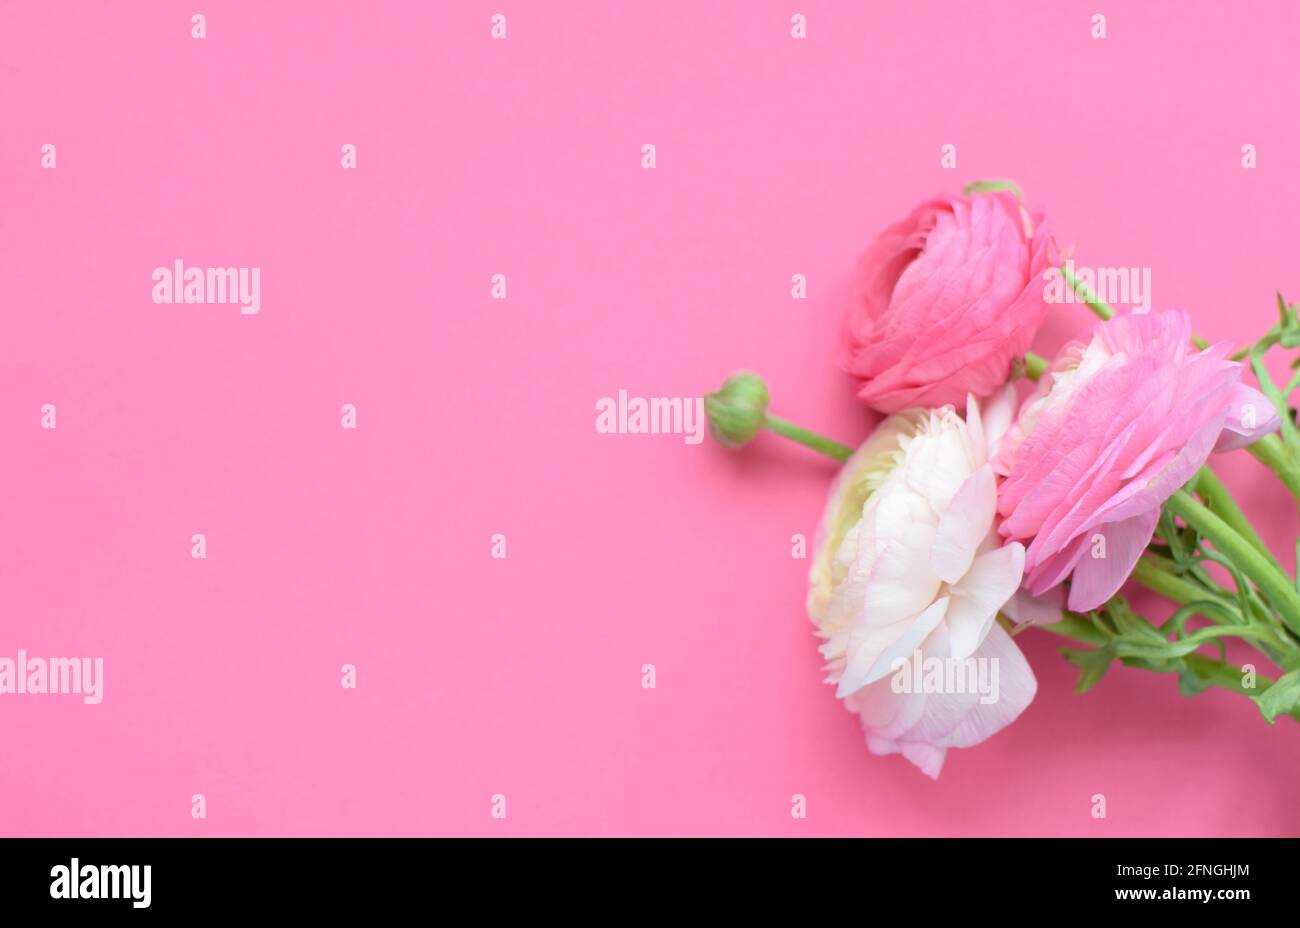 Beautiful bouquet of pink ranunculus flowers on a pink background. Flowers buttercup. Copy space for text Stock Photo